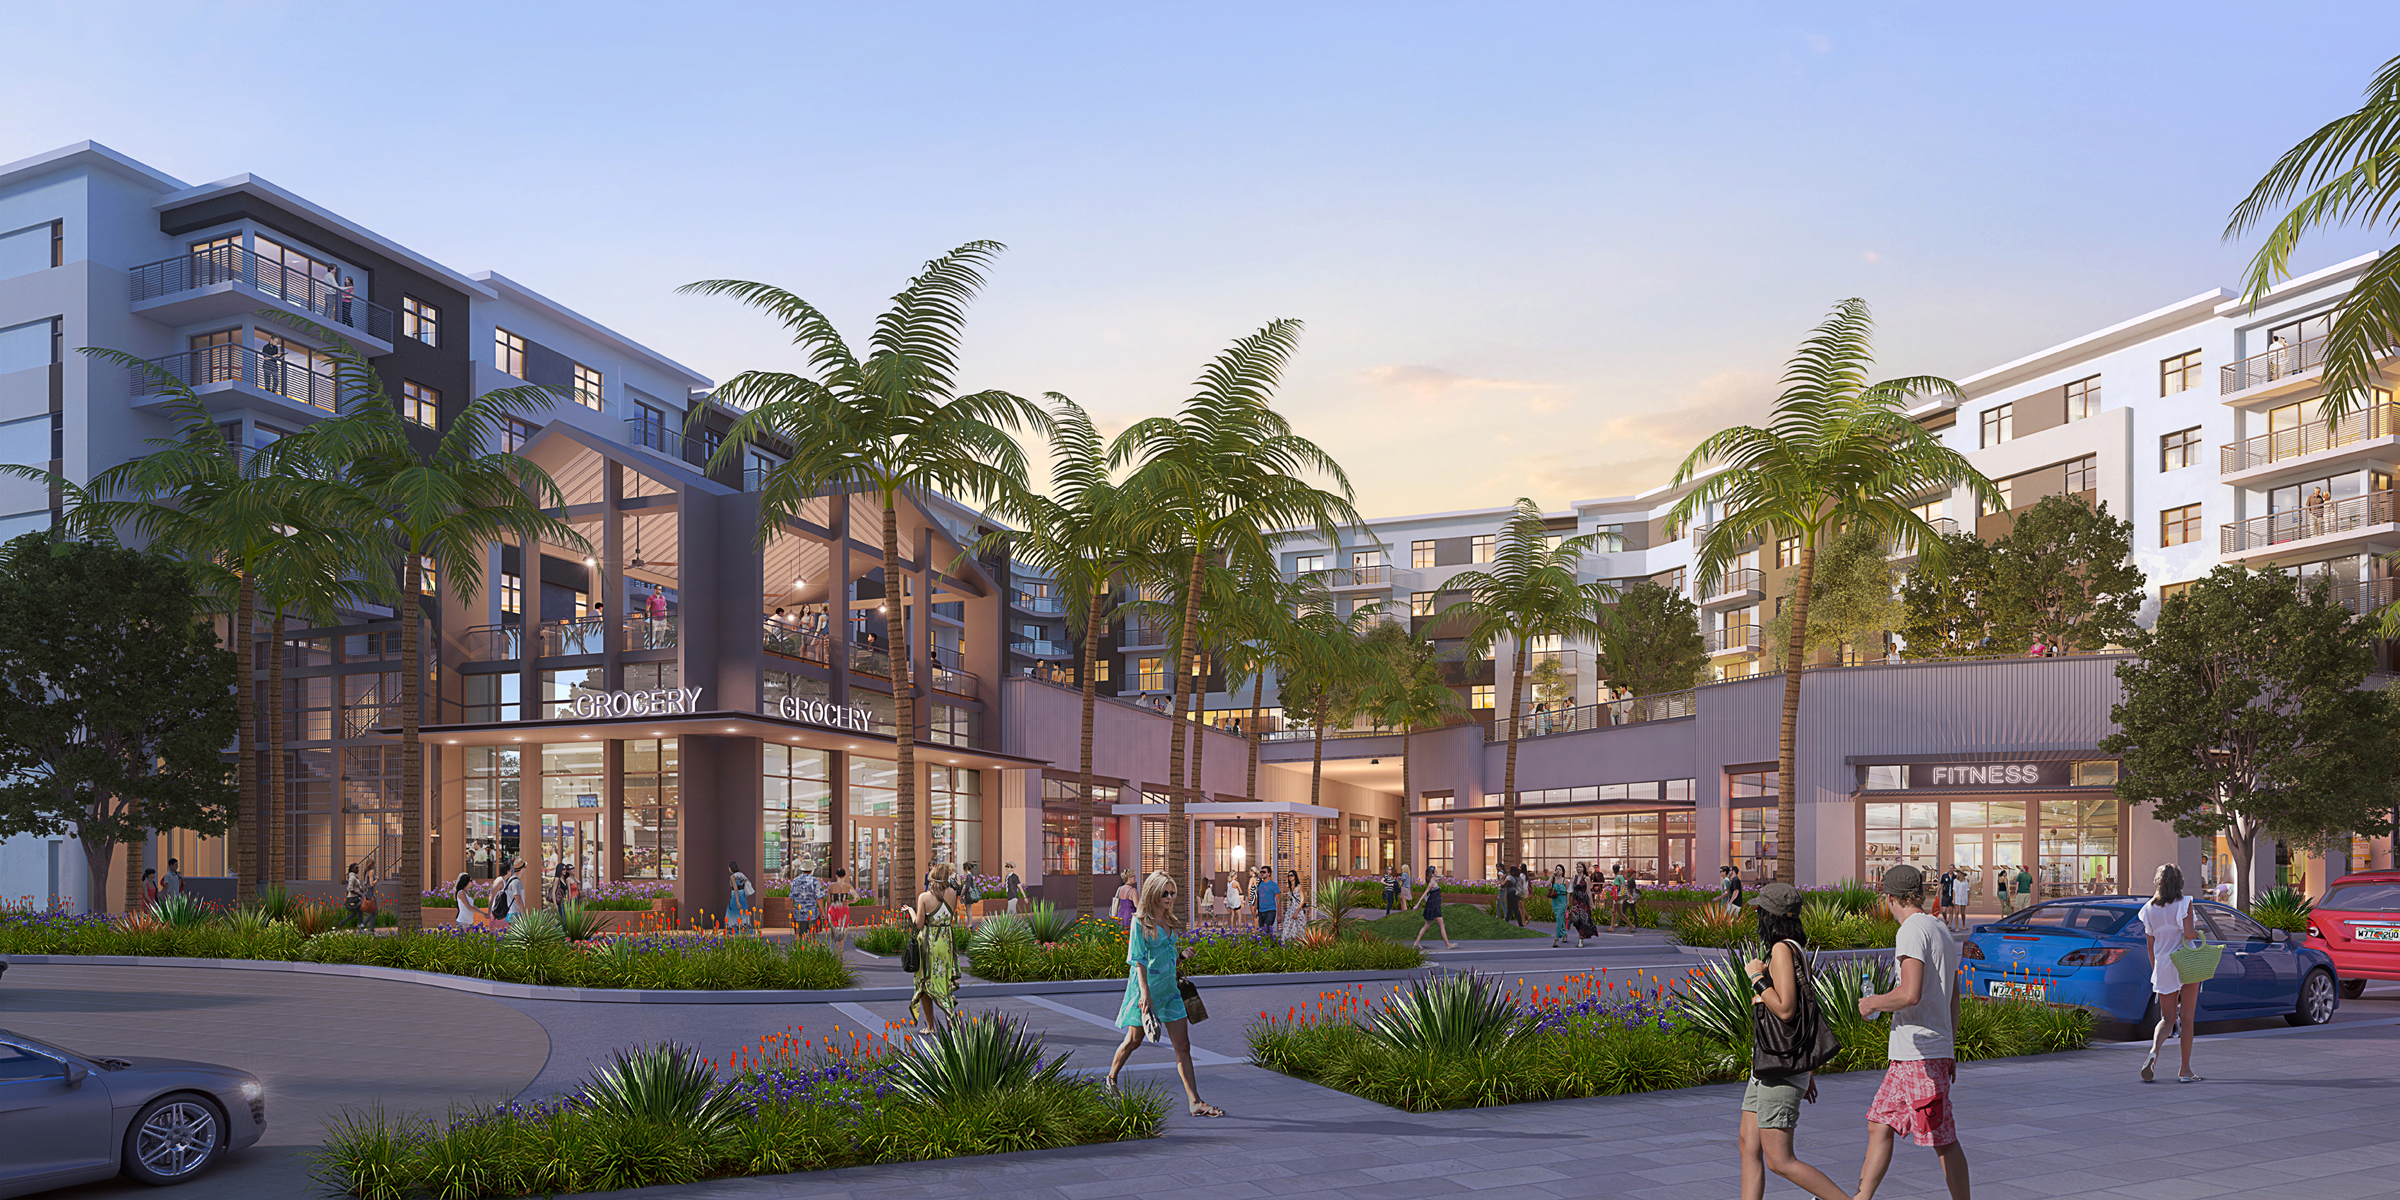 Settlement Reached in Litigation Over Controversial Fashion Mall Project in Broward